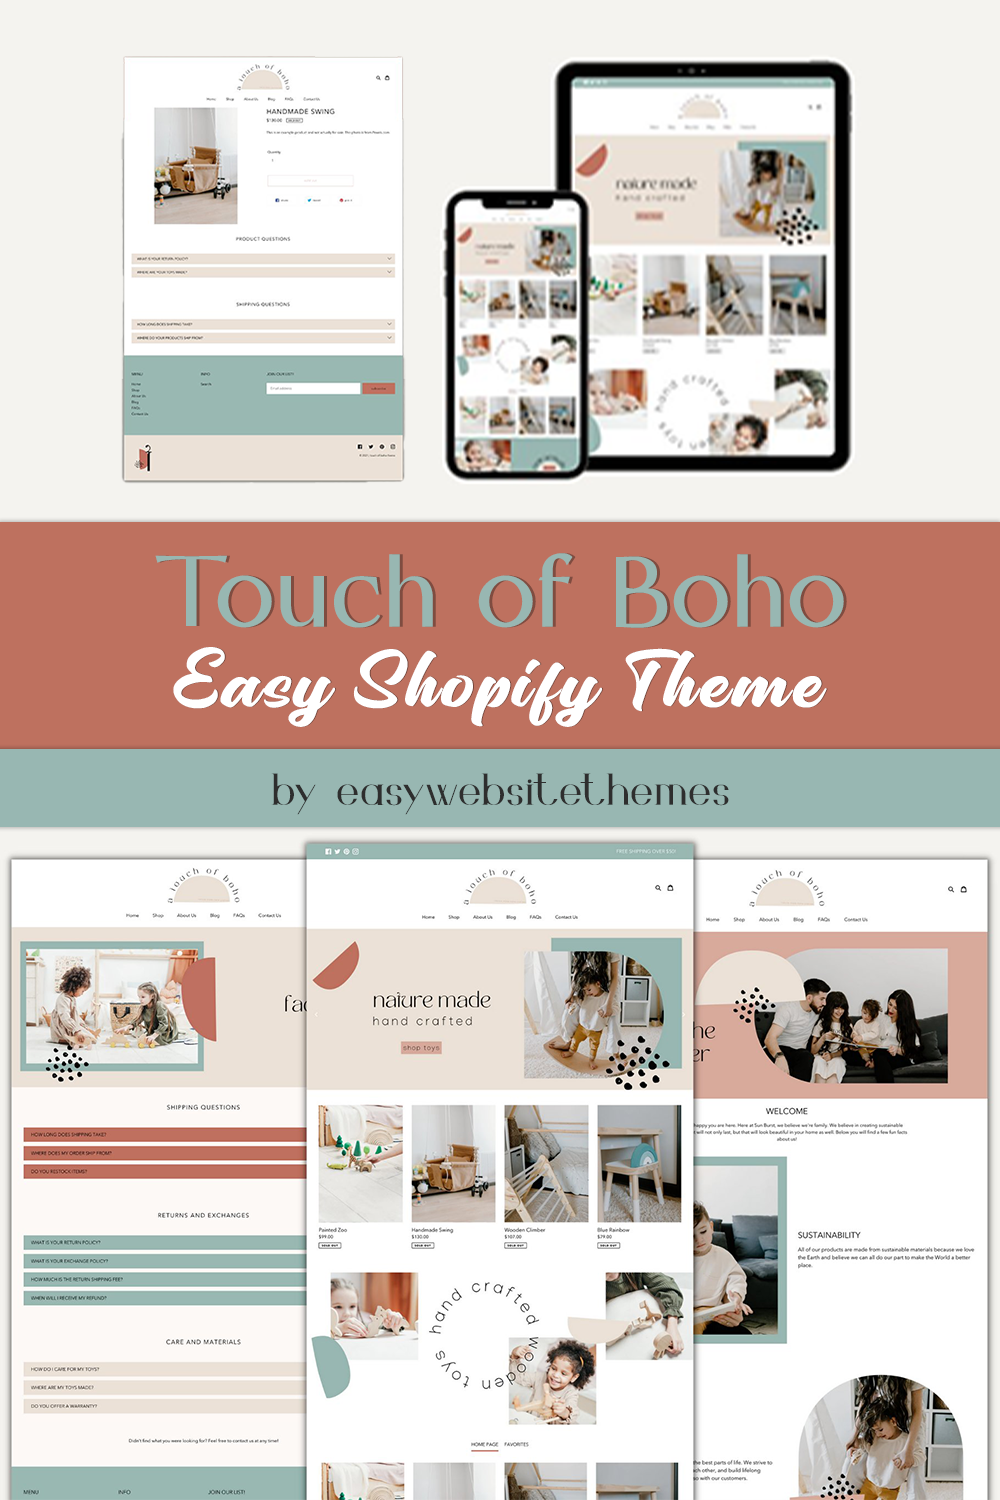 Easy shopify theme touch of boho pinterest images.